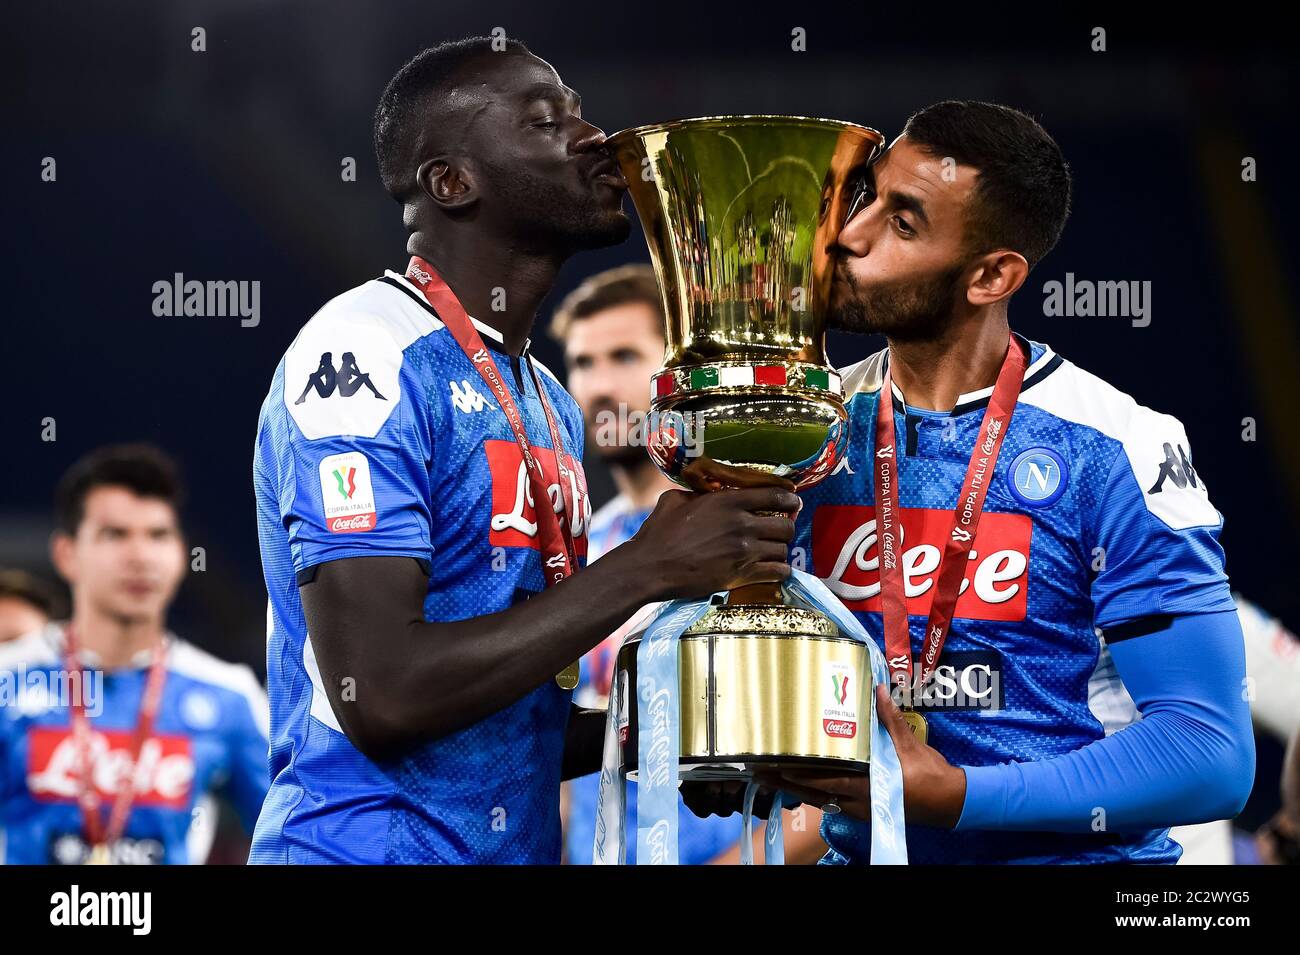 Rome, Italy - 17 June, 2020: Kalidou Koulibaly (L) and Faouzi Ghoulam of SSC Napoli kiss the trophy during the awards ceremony at end of the Coppa Italia final football match between SSC Napoli and Juventus FC. SSC Napoli won 4-2 over Juventus FC after penalty kicks, regular time ended 0-0. Credit: Nicolò Campo/Alamy Live News Stock Photo